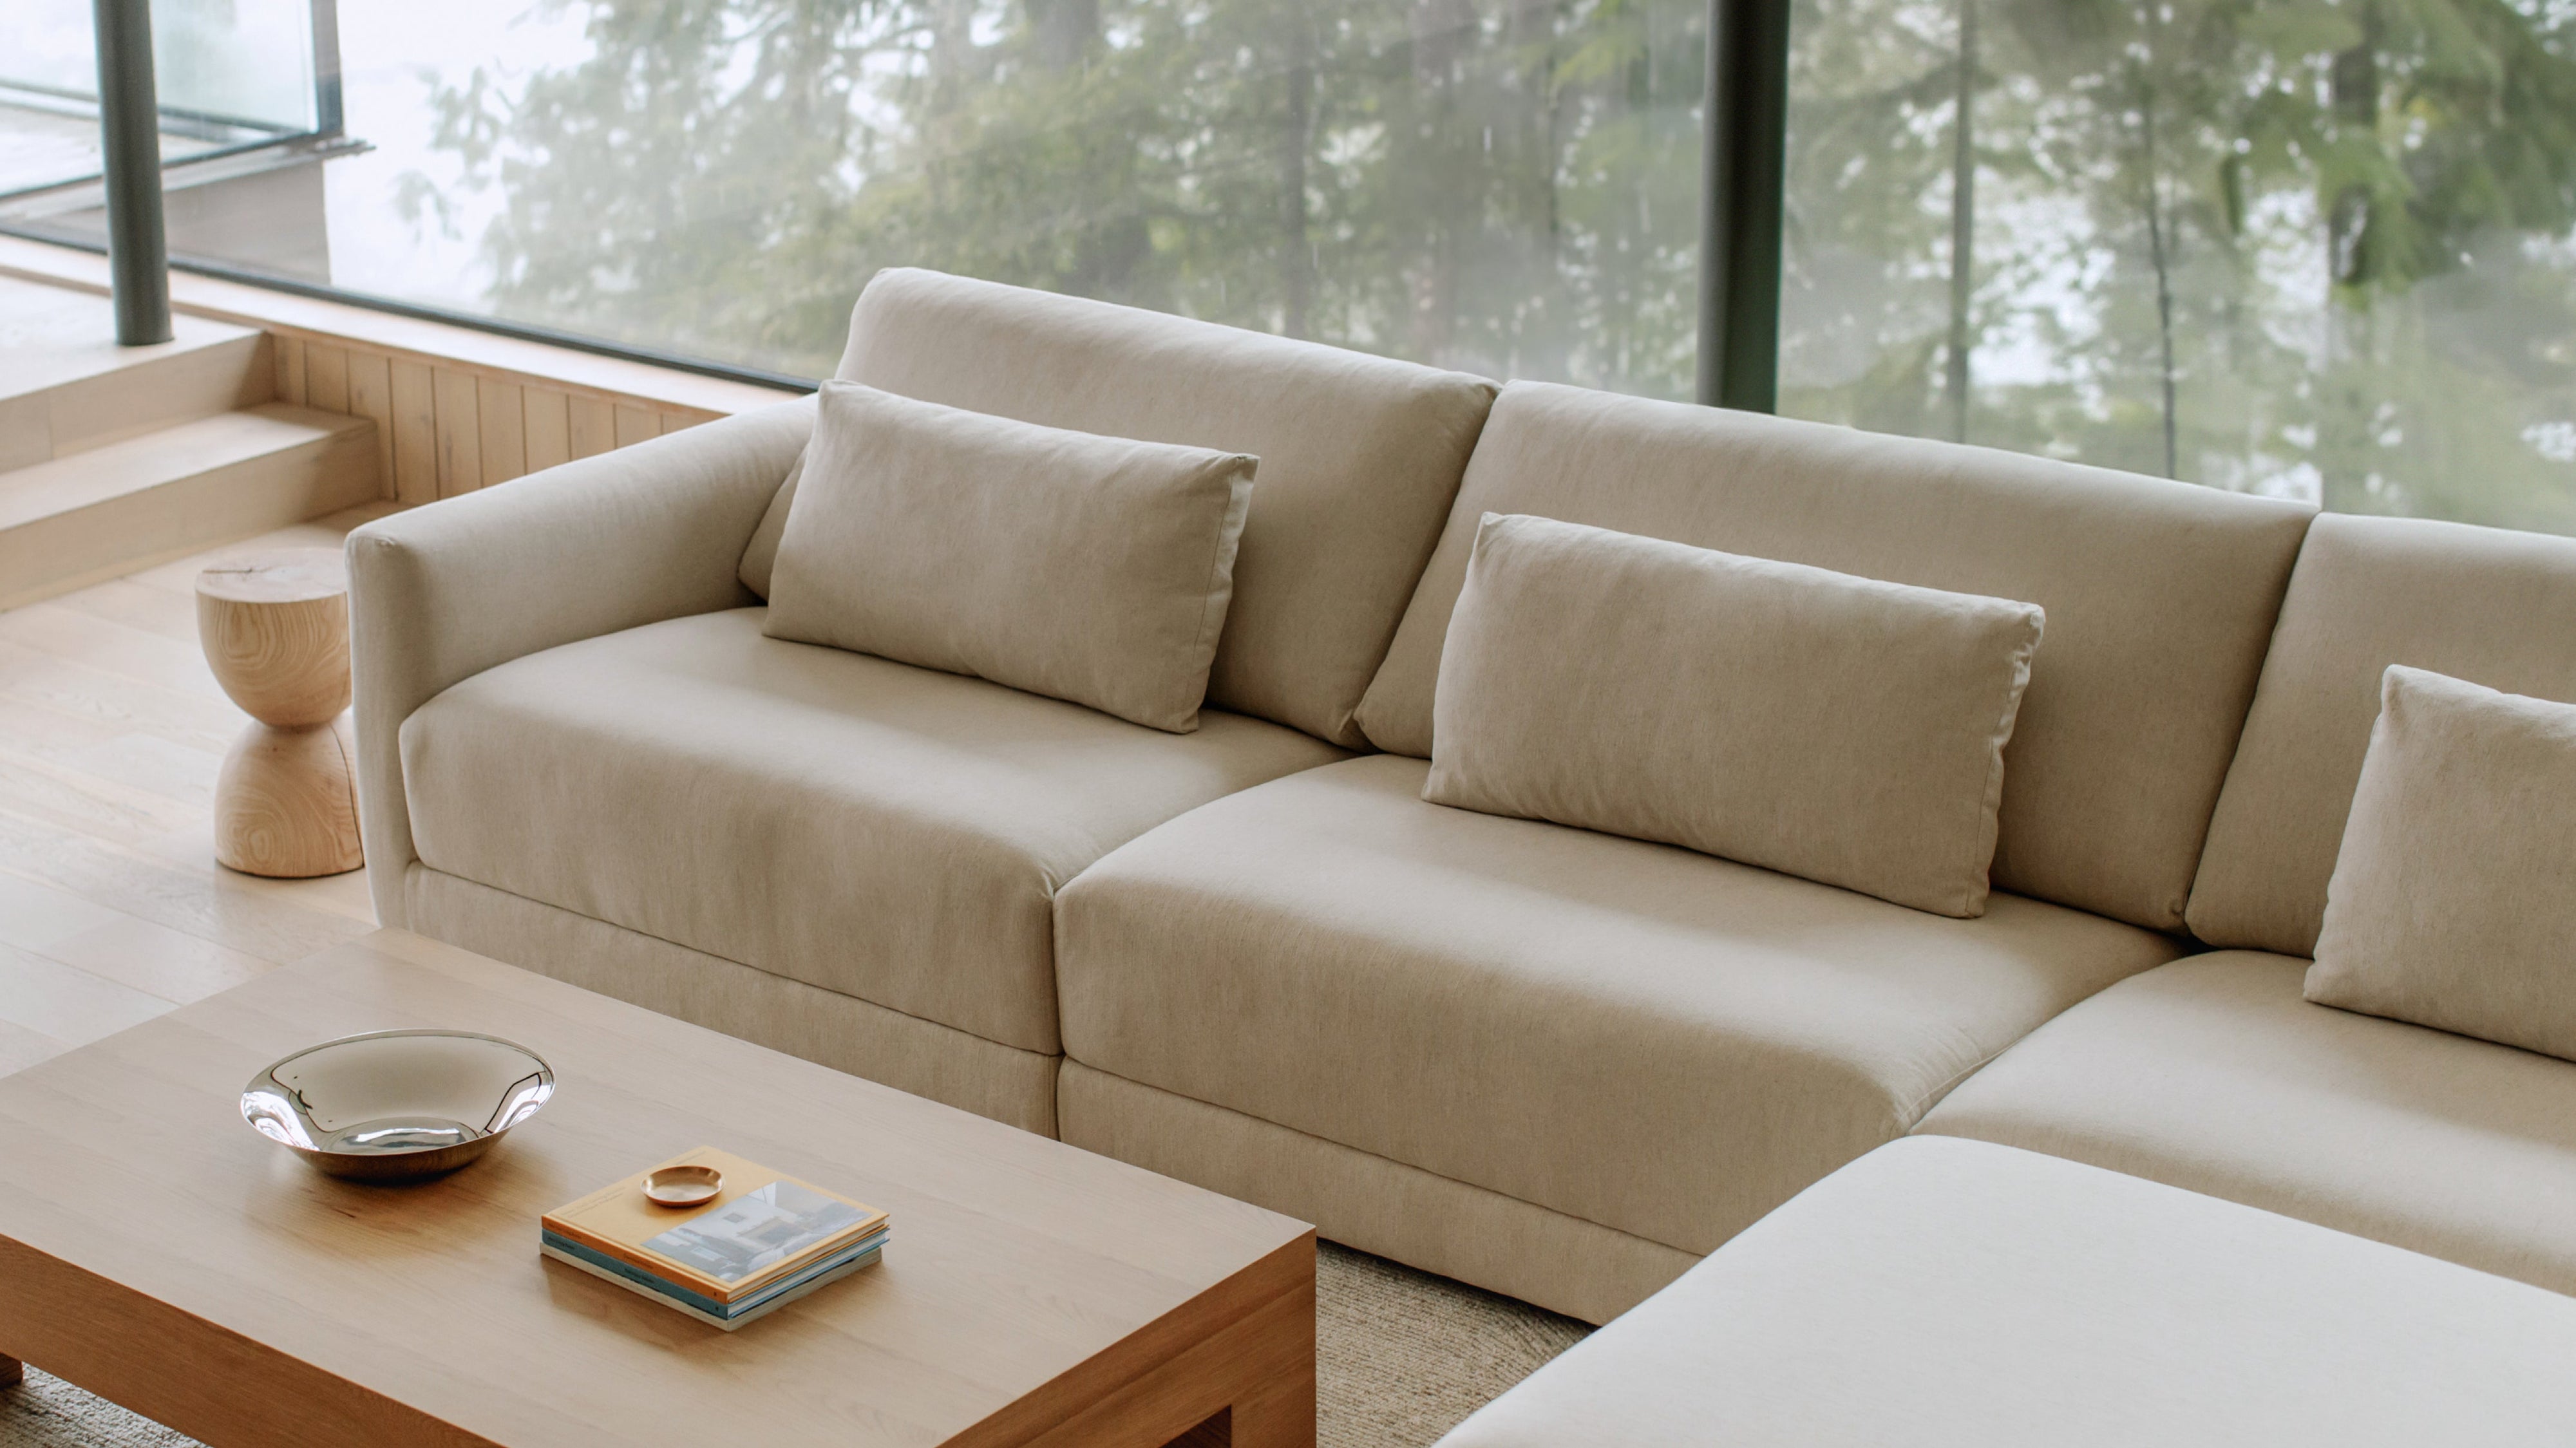 Wind Down 5-Piece Modular Sectional Closed, Beach - Image 8